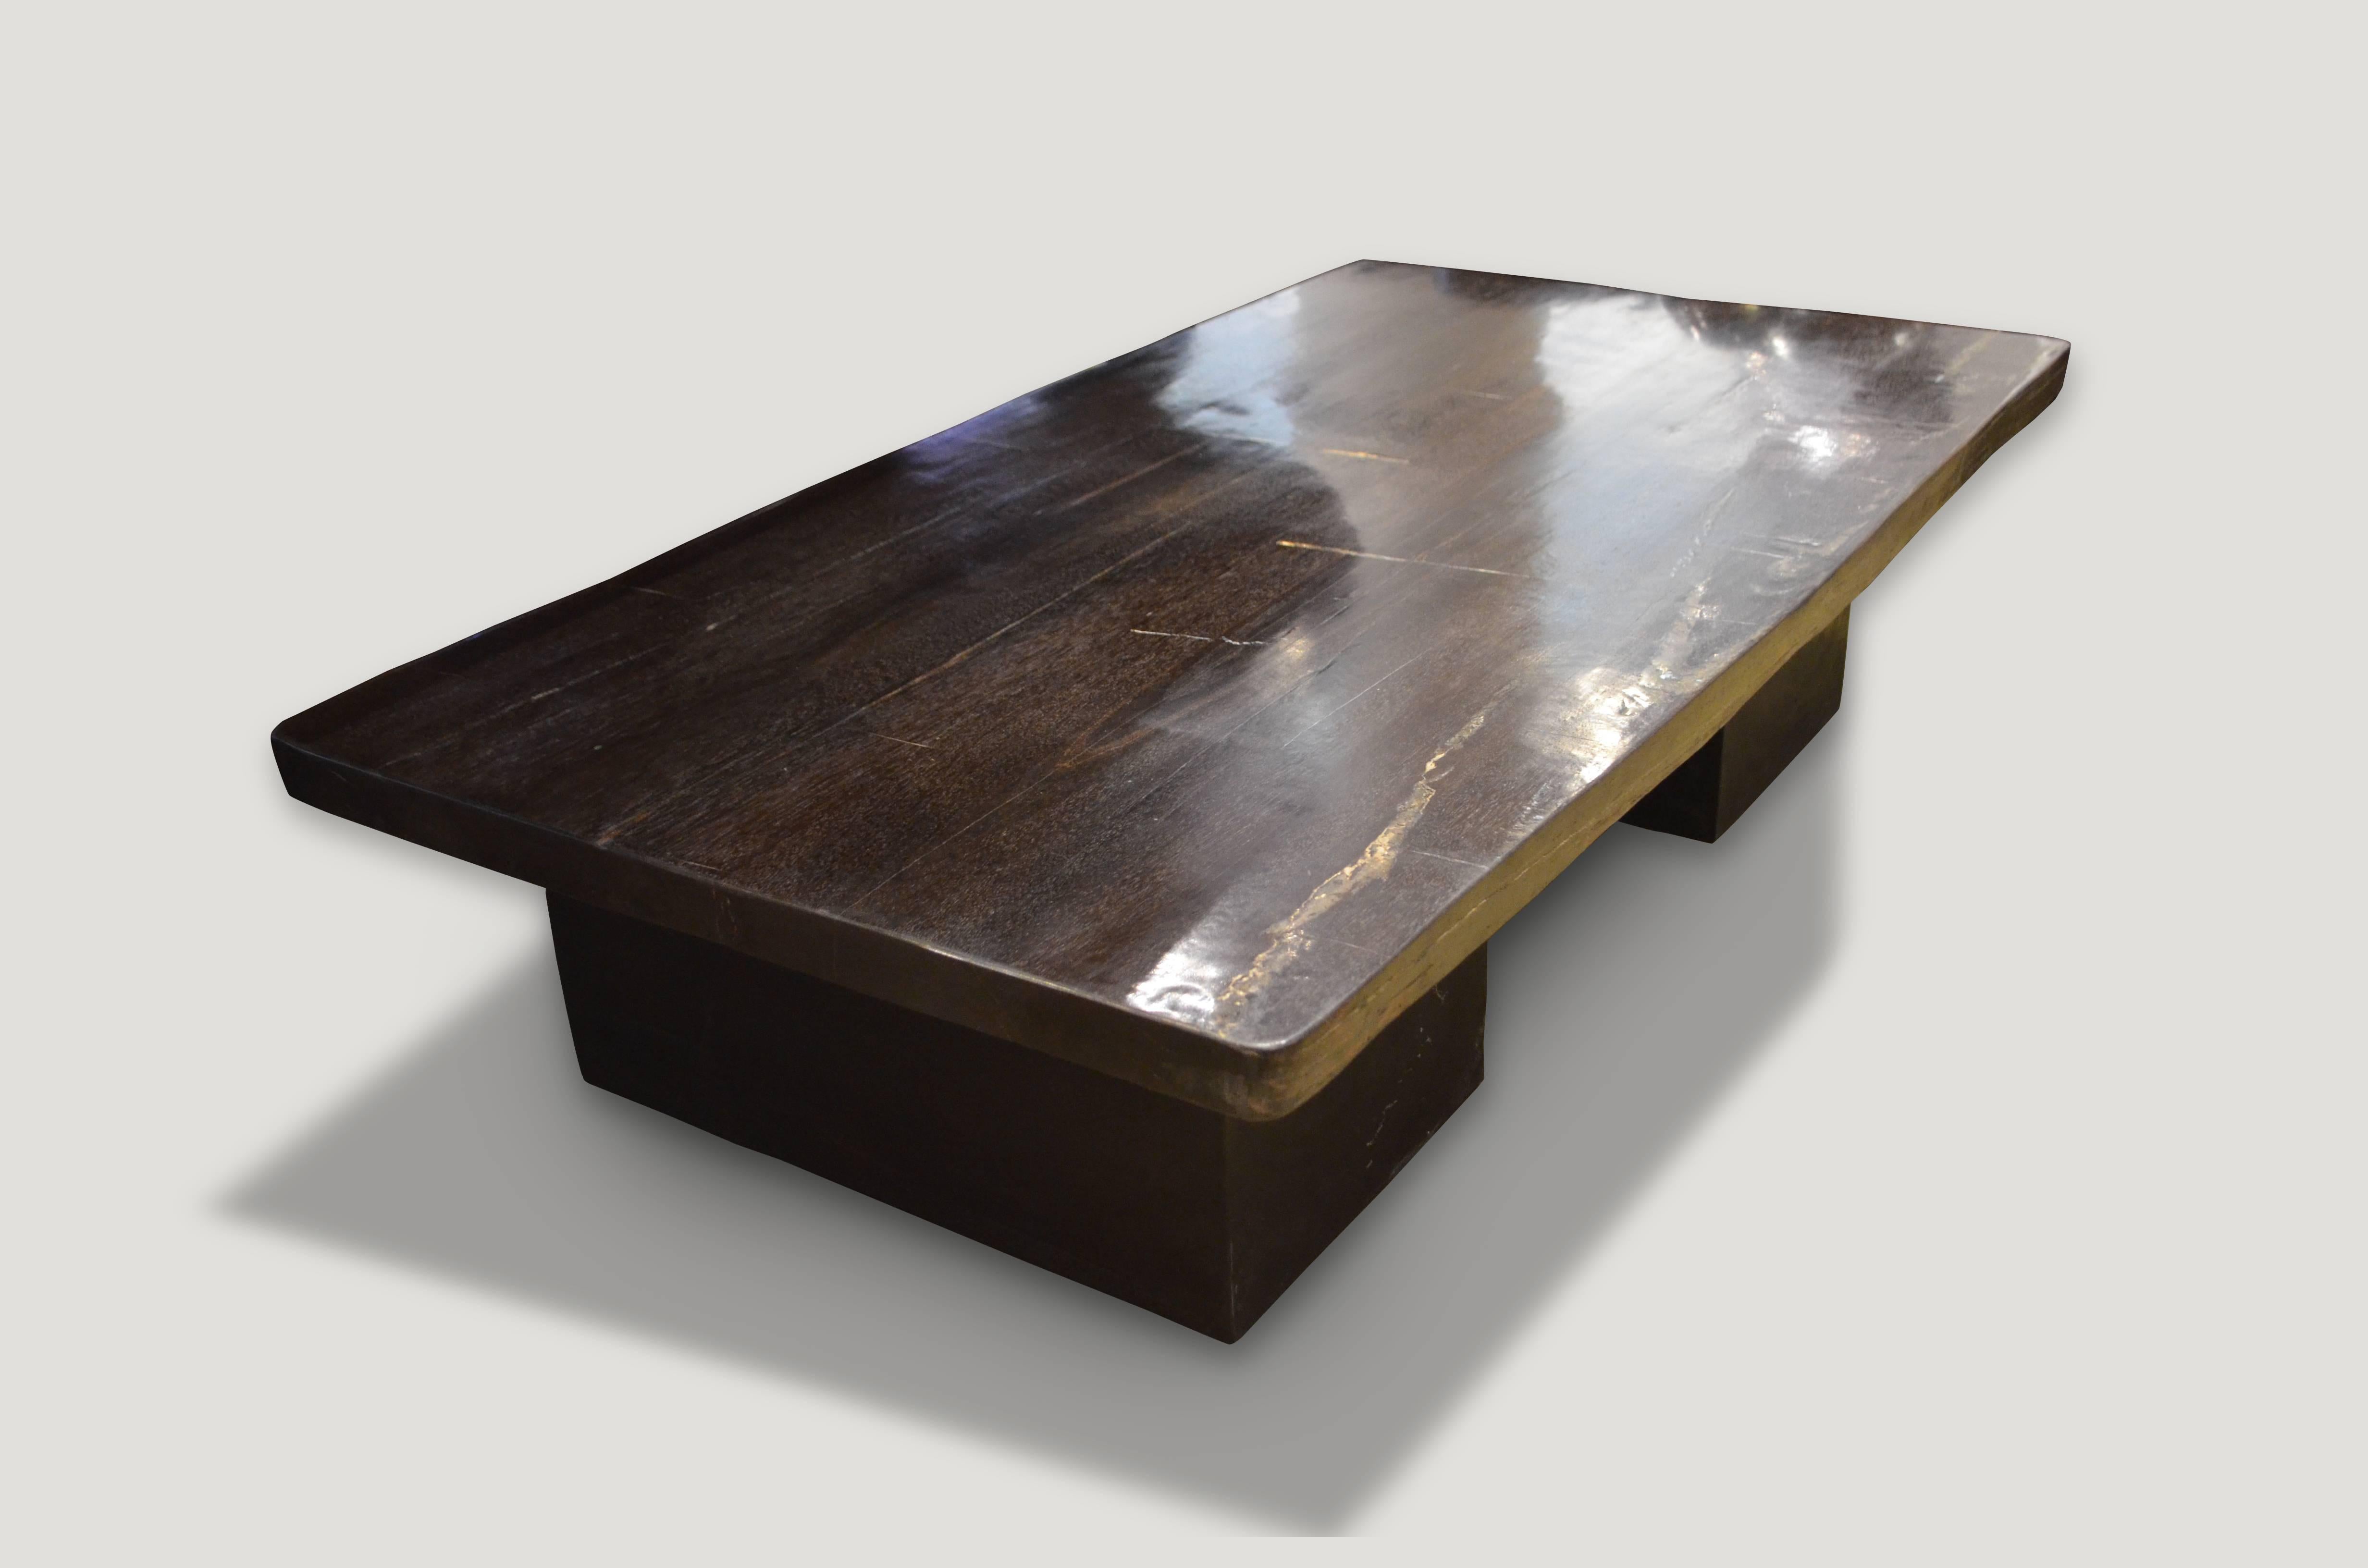 High quality super smooth petrified wood coffee table, dining table or counter top. Stunning charcoal grey, black and contrasting beige and white natural tones make this an impressive piece for any space. This two inch thick slab is shown floating